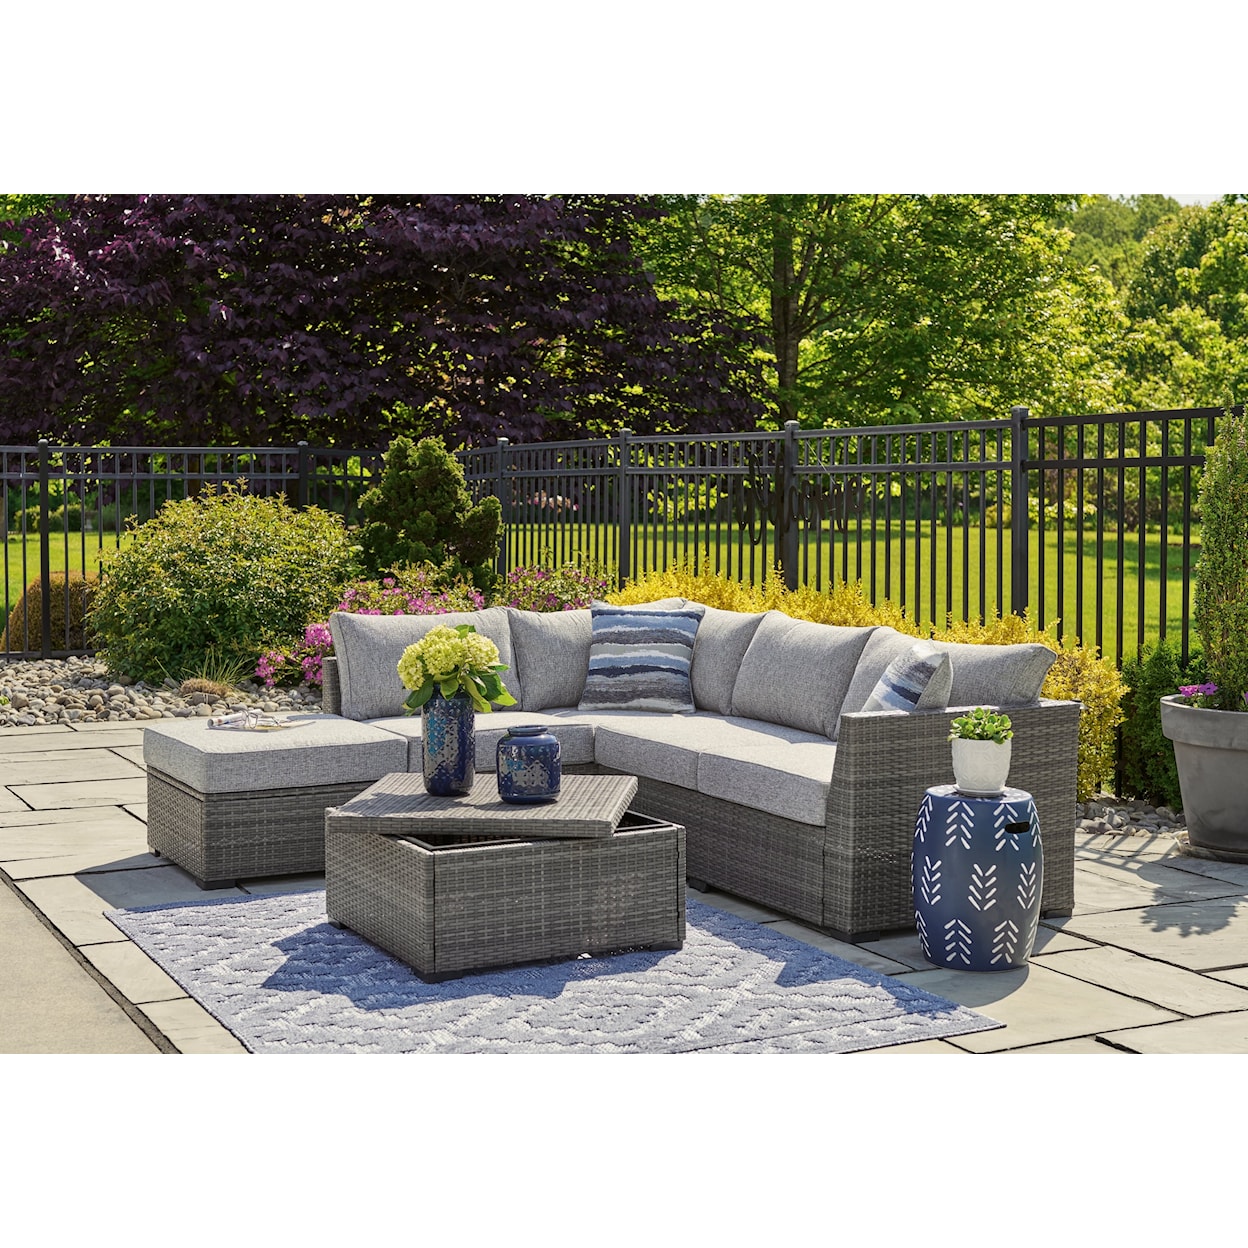 Michael Alan Select Petal Road Outdoor Sectional Set with Ottoman & Table